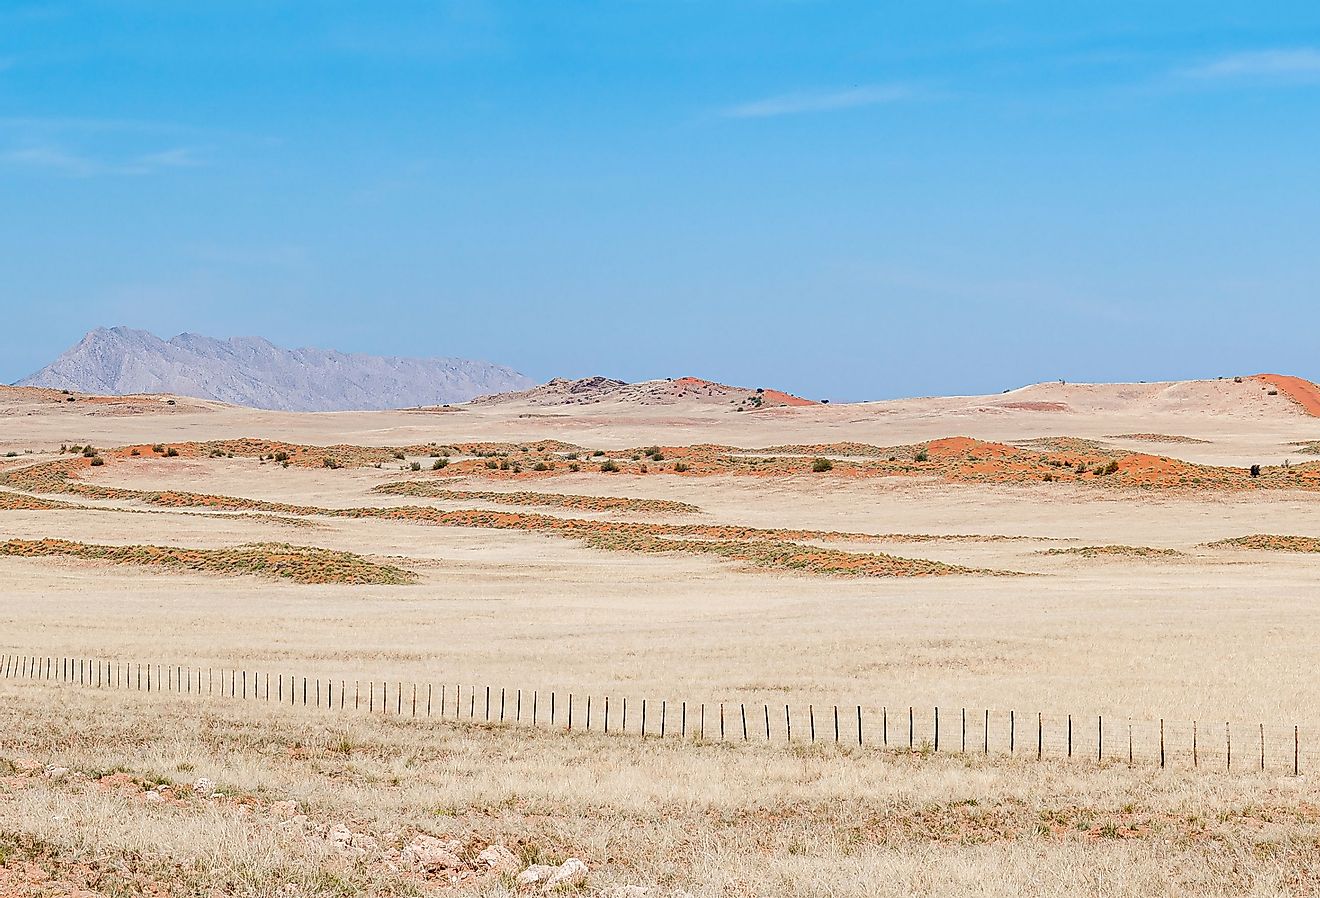 Panoramic view on road C14 just south of the Tropic of Capricorn, Egypt.